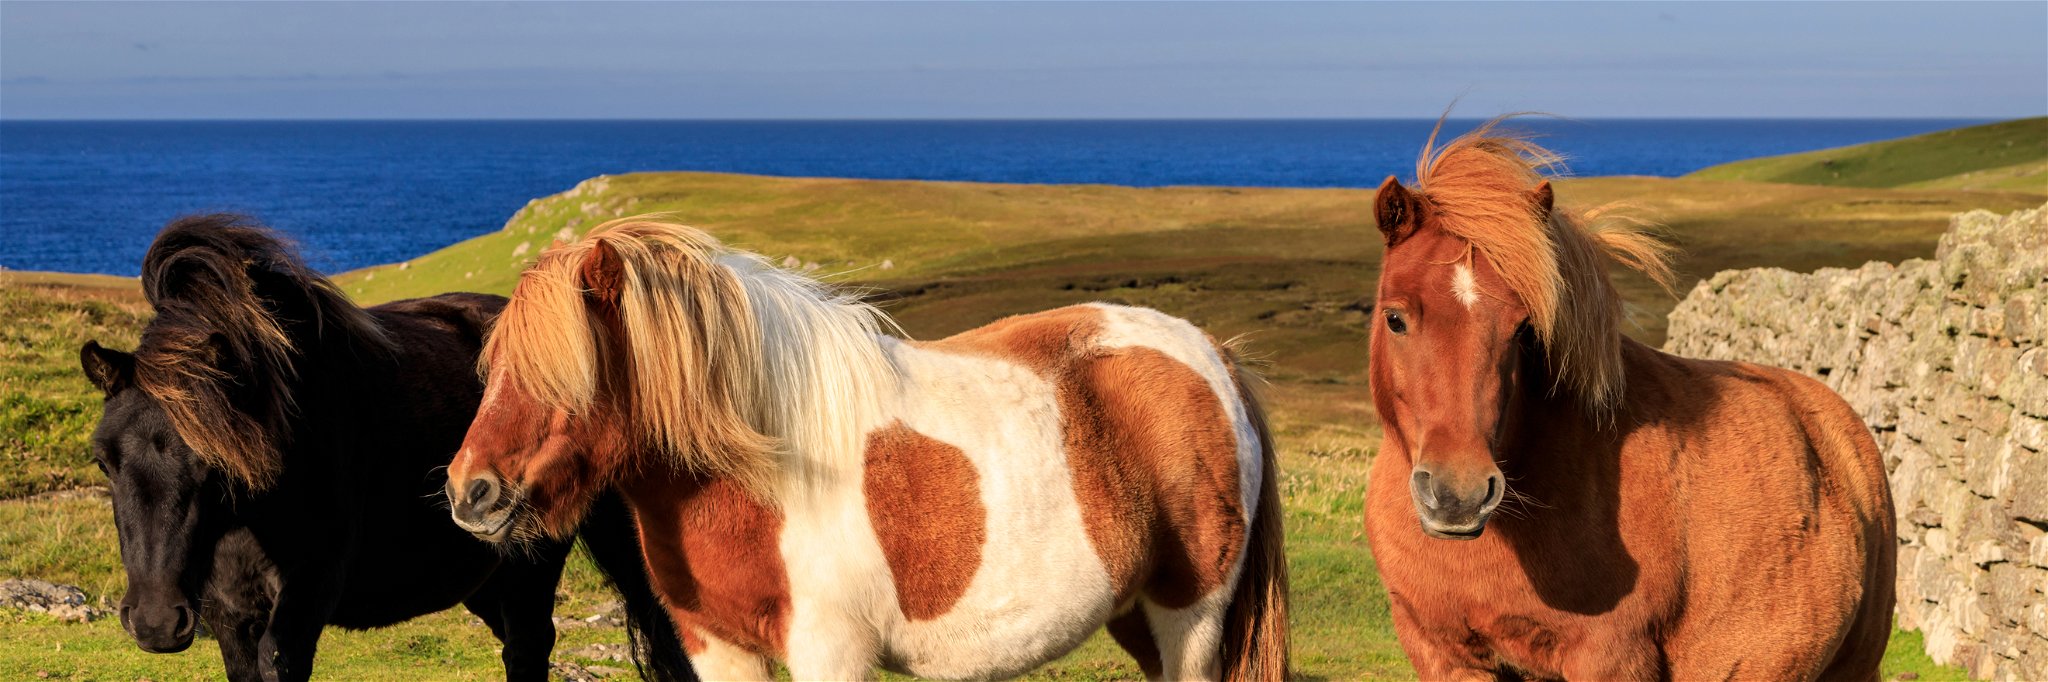 A Shetland pony was appointed as "unofficial mayor"&nbsp;of Cockington, a village in England.